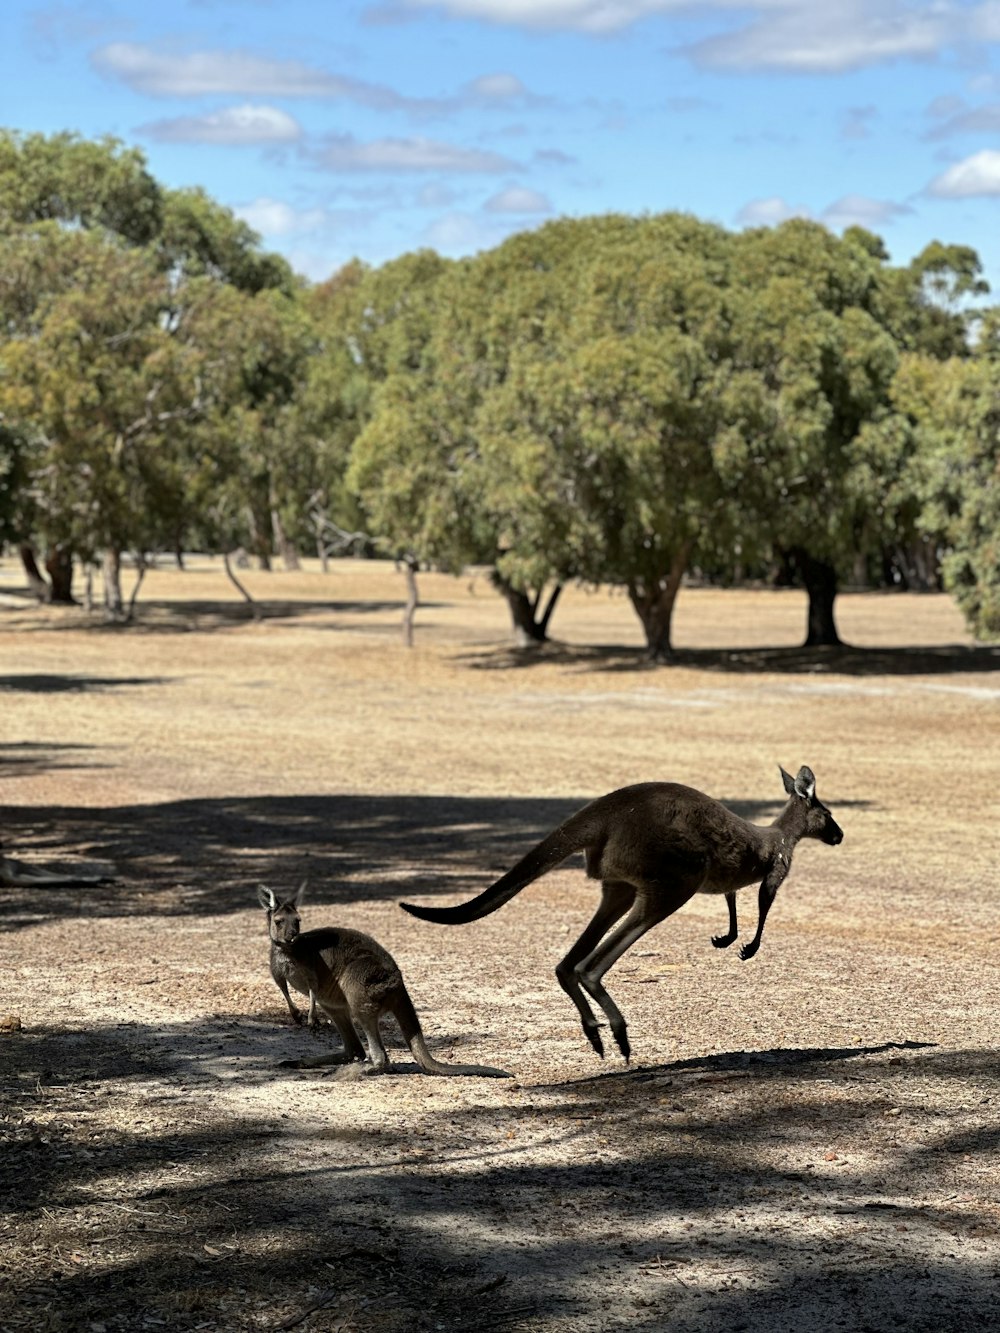 a dog chasing a kangaroo in a field